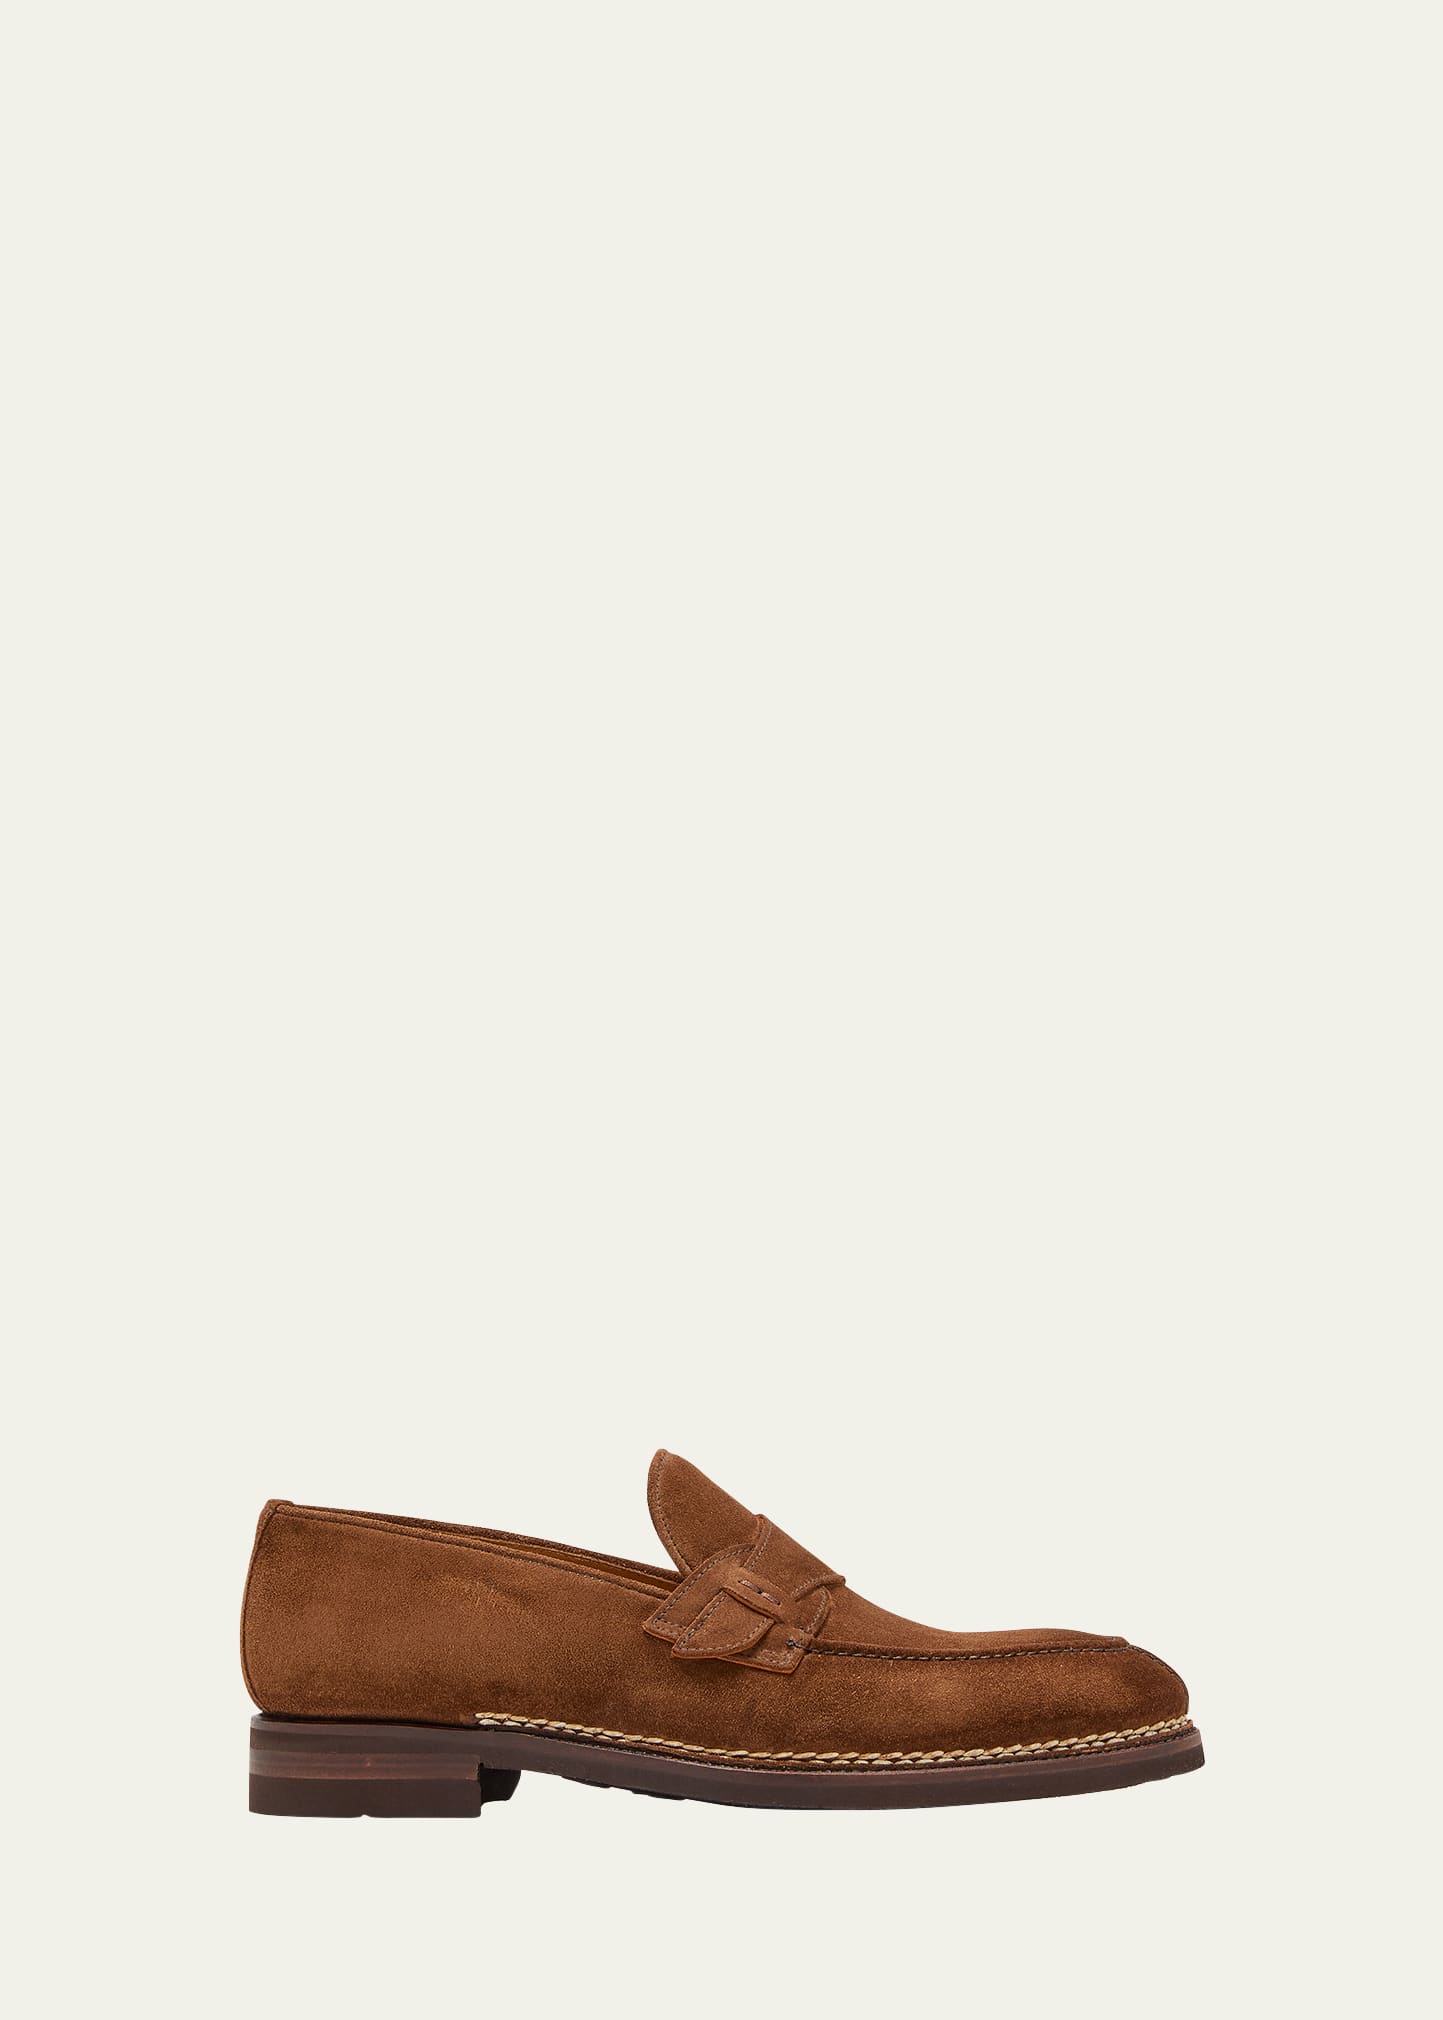 Men's Riviera Suede Penny Loafers